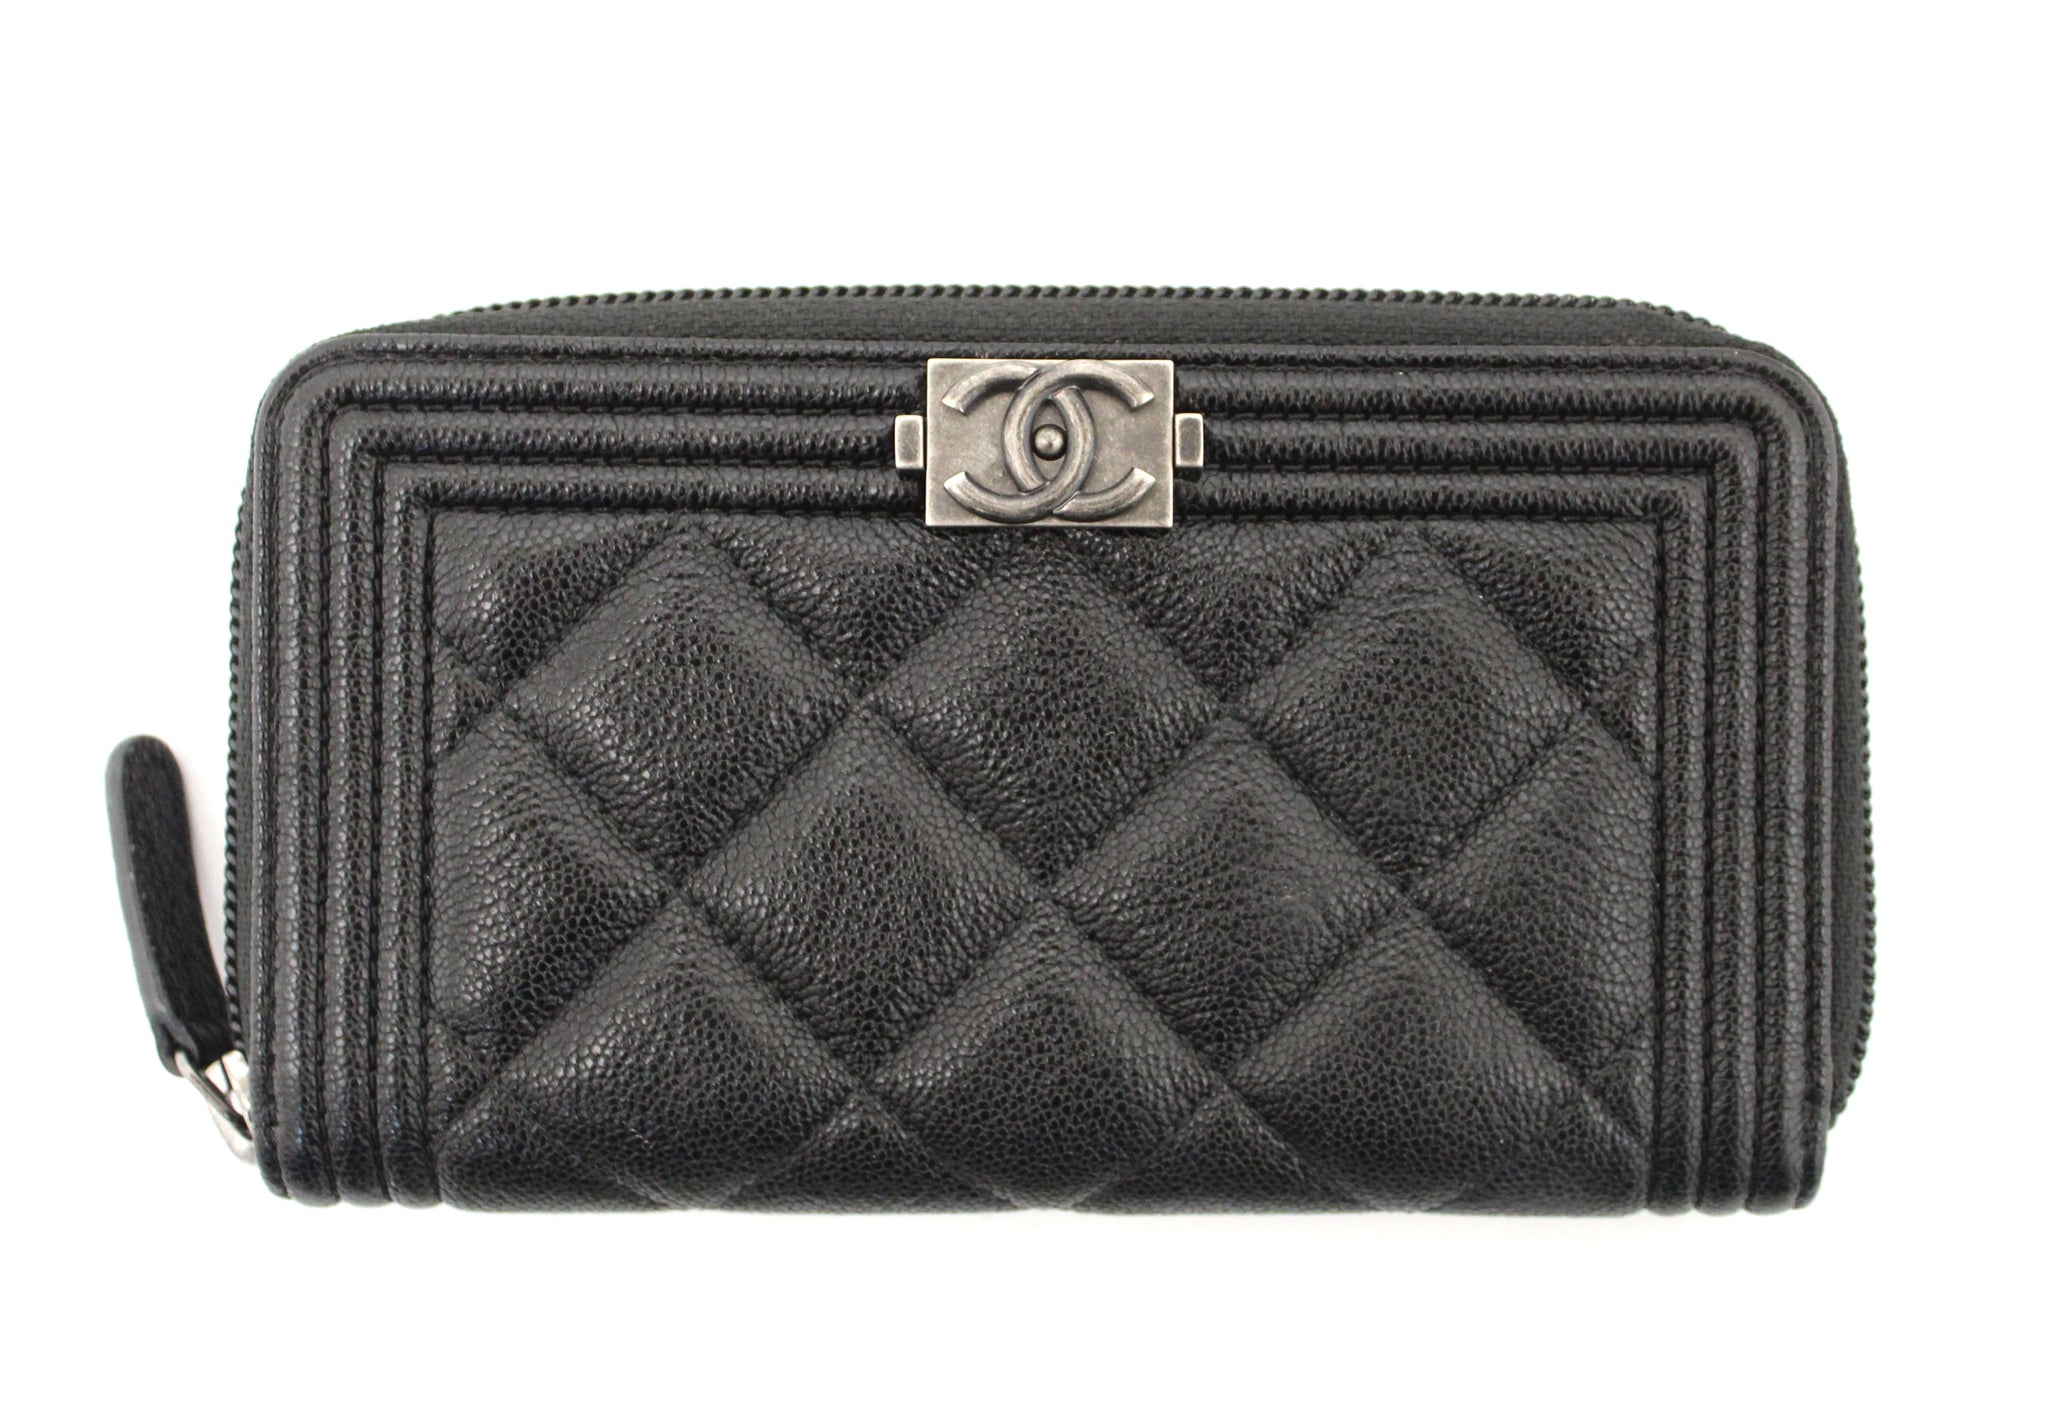 NEW Chanel Black Quilted Caviar Leather Boy Small Zip Around Wallet – Italy  Station